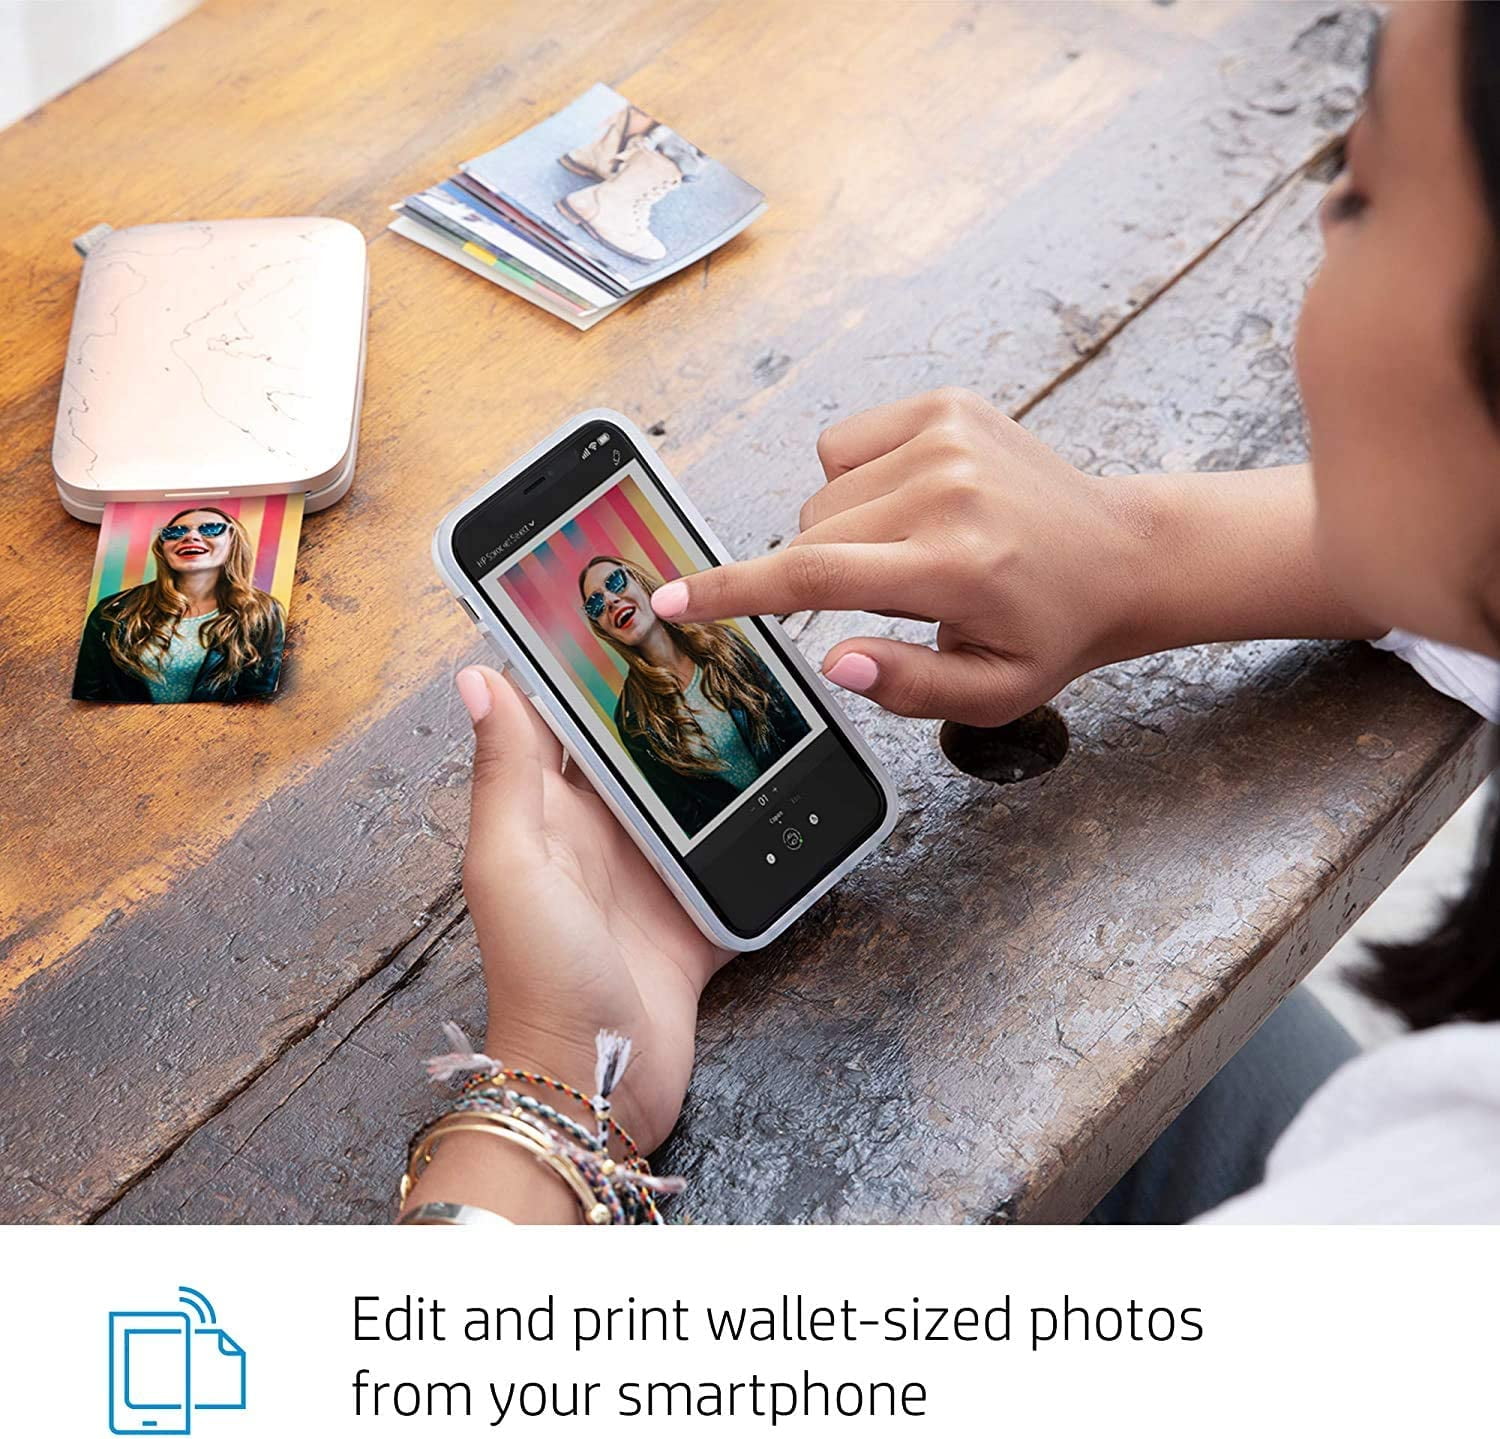 HP Sprocket Select Portable 2.3x3.4 Instant Photo Printer Eclipse Print Pictures on Zink Sticky-Backed Paper from Your iOS & Android Device. 